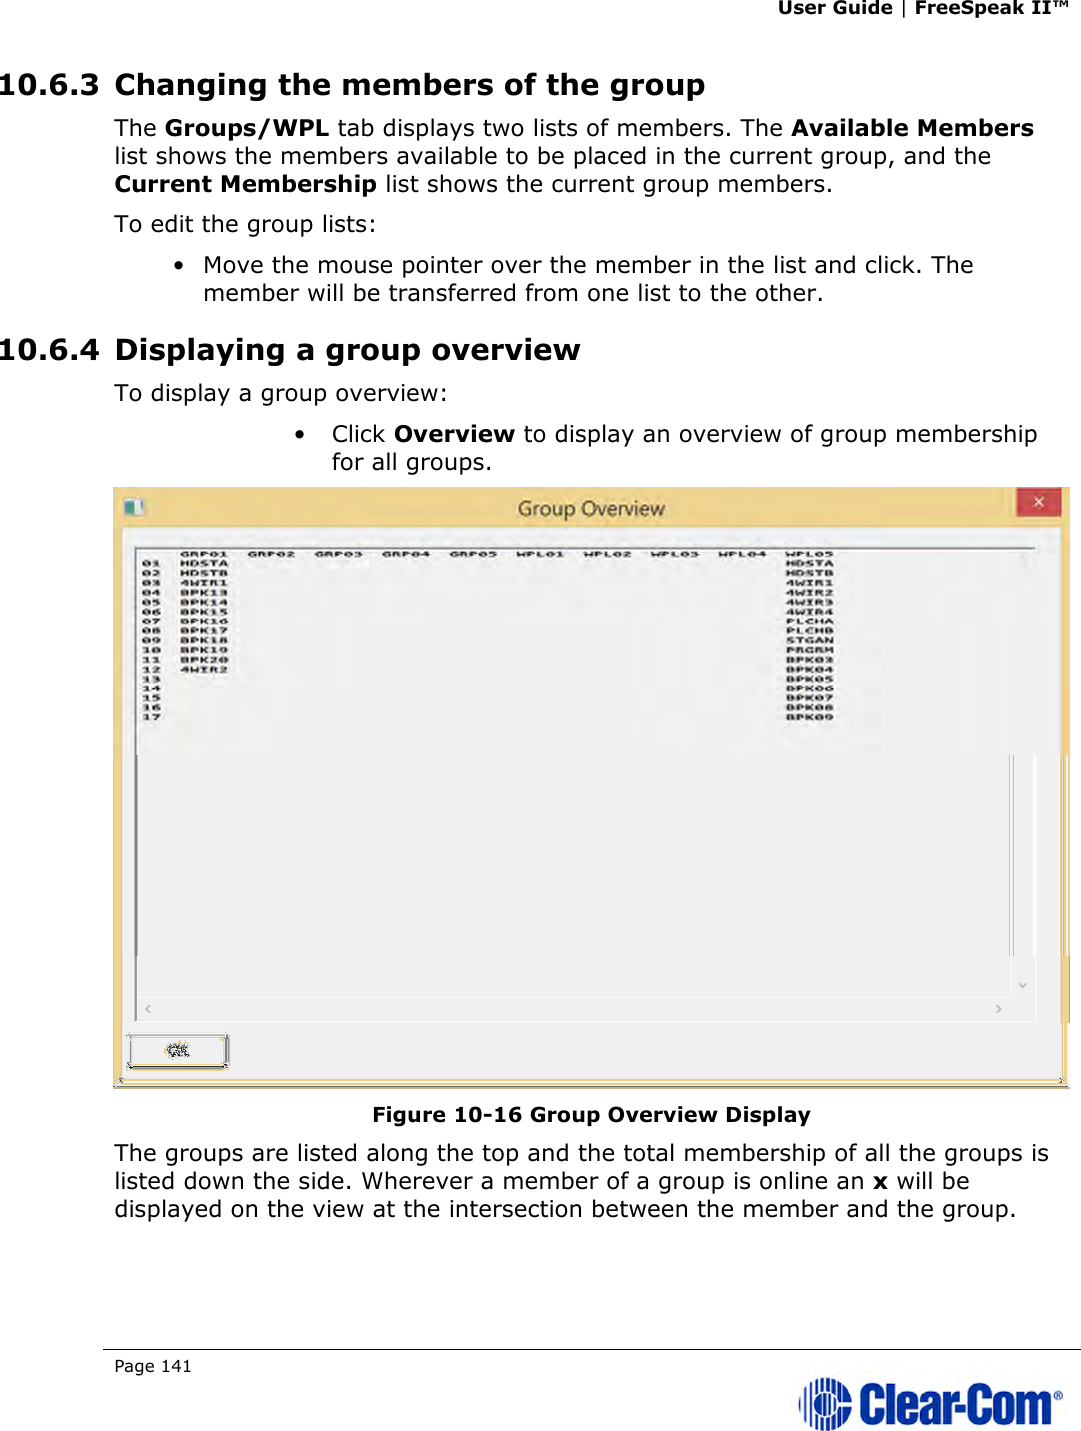 User Guide | FreeSpeak II™  Page 141   10.6.3 Changing the members of the group The Groups/WPL tab displays two lists of members. The Available Members list shows the members available to be placed in the current group, and the Current Membership list shows the current group members. To edit the group lists: • Move the mouse pointer over the member in the list and click. The member will be transferred from one list to the other. 10.6.4 Displaying a group overview To display a group overview: • Click Overview to display an overview of group membership for all groups.  Figure 10-16 Group Overview Display The groups are listed along the top and the total membership of all the groups is listed down the side. Wherever a member of a group is online an x will be displayed on the view at the intersection between the member and the group. 